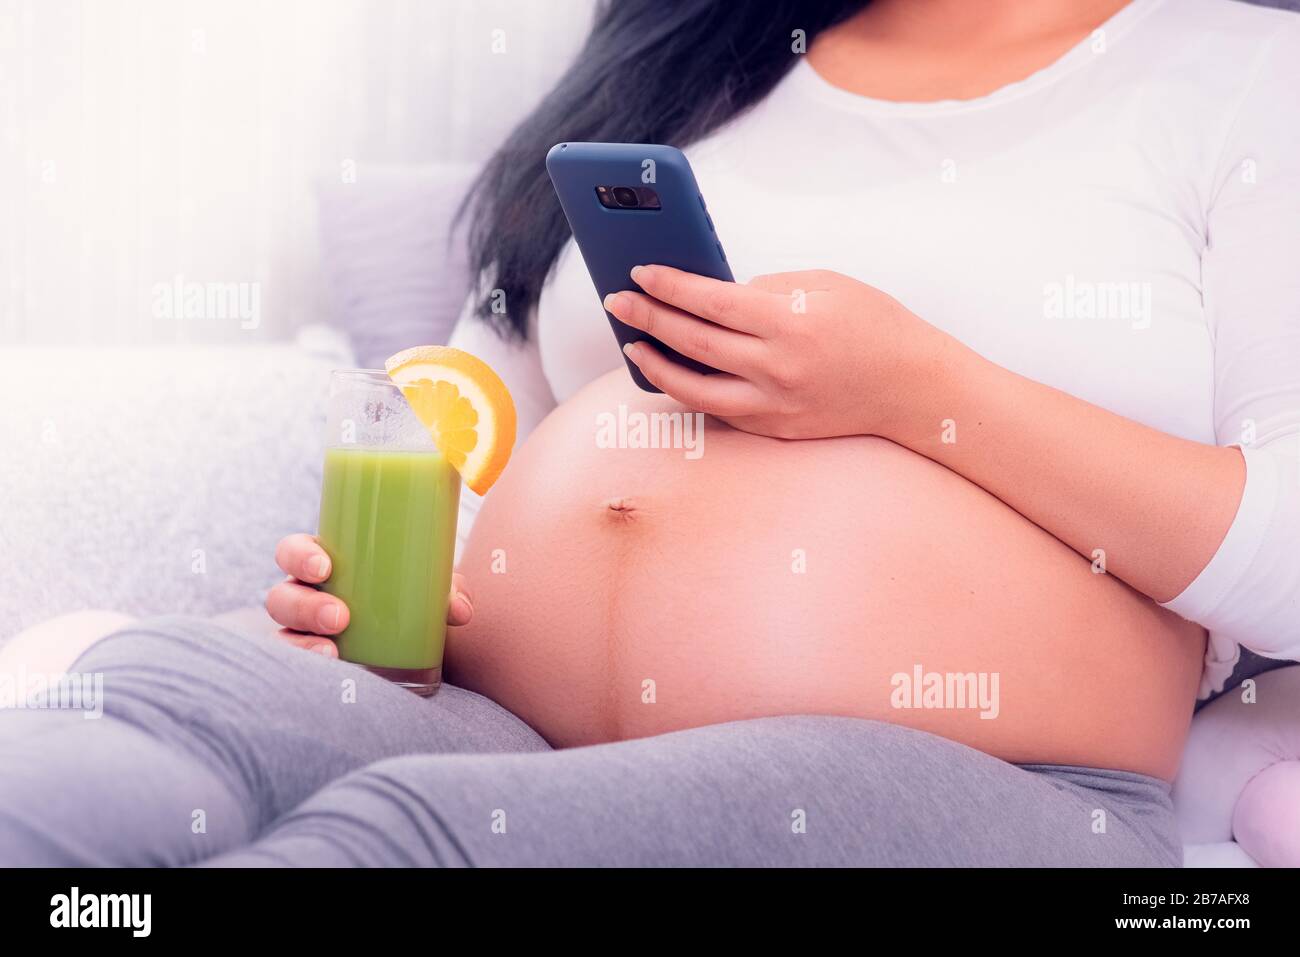 Pregnant woman using her smartphone while relaxing on the bed, drinking healthy green juice and exposing belly. Stock Photo